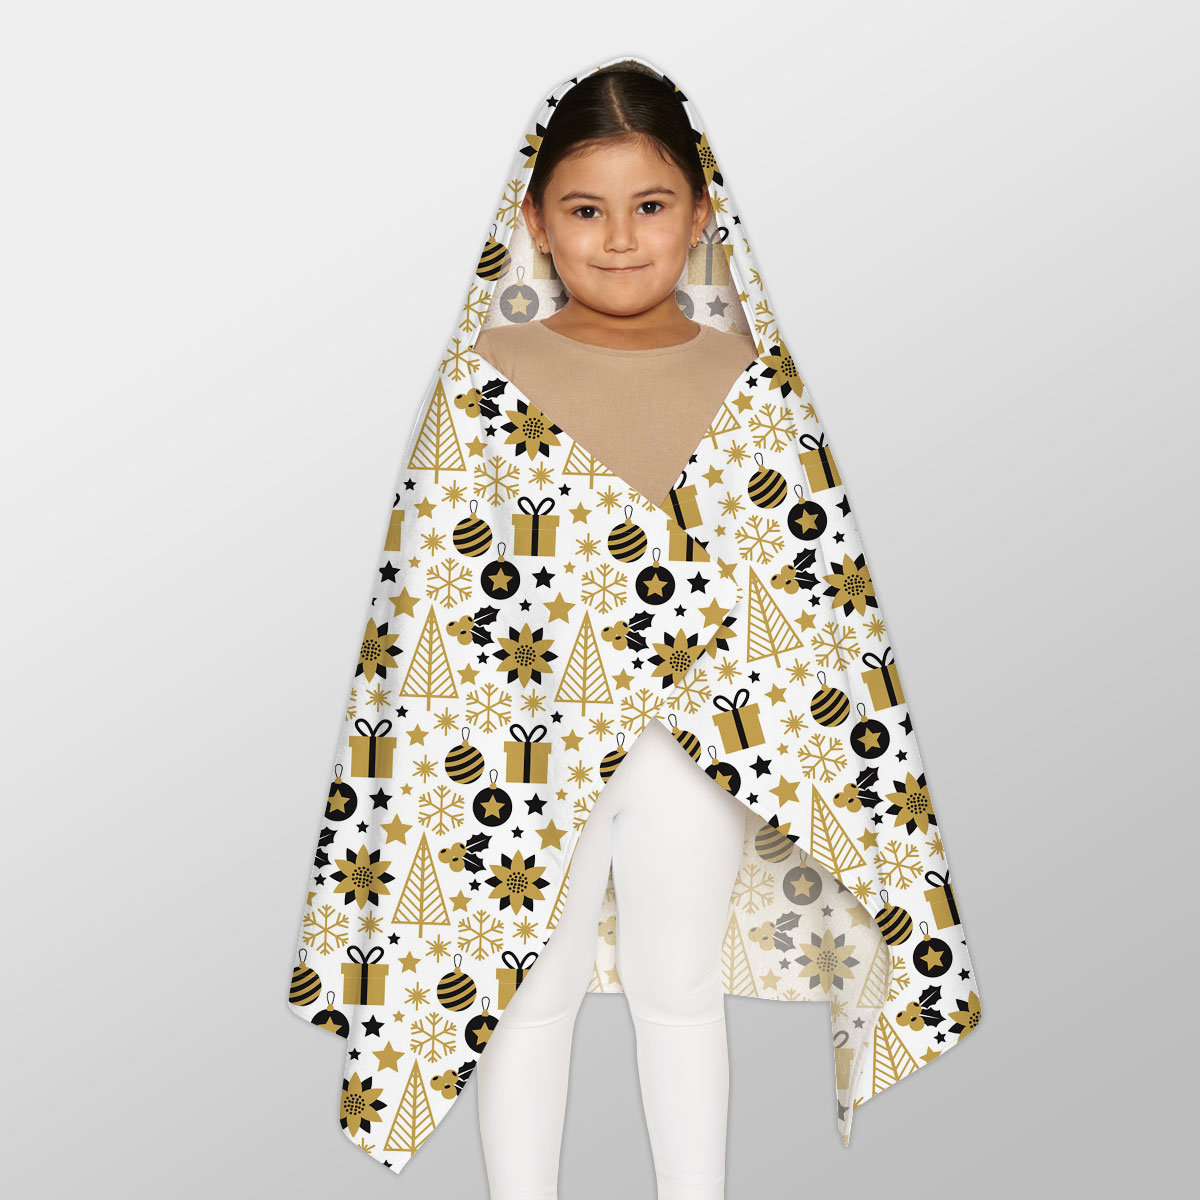 Black And Gold Christmas Gift, Holly Leaf, Snowflake On White Background Youth Hooded Towel